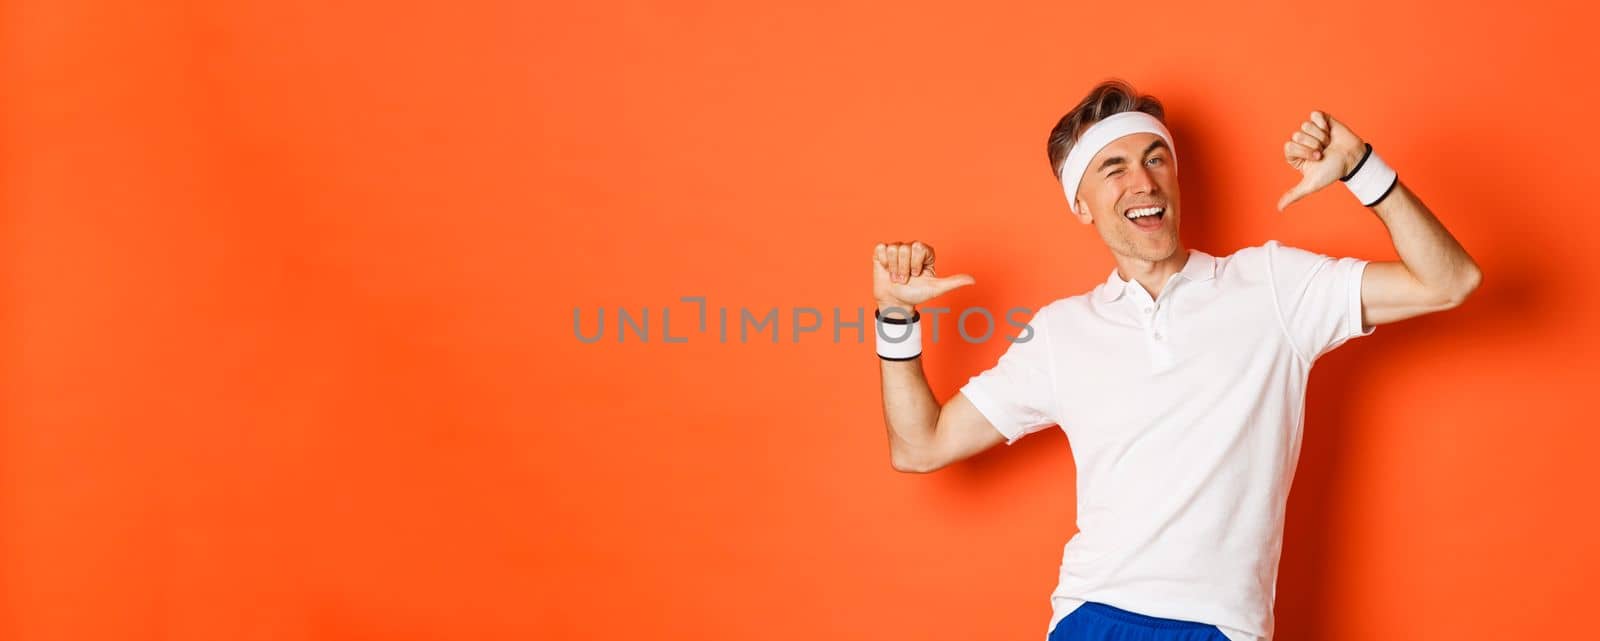 Concept of sport, fitness and lifestyle. Image of confident middle-aged man pointing at himself, bragging about achievement, wearing clothes for workout, standing over orange background.